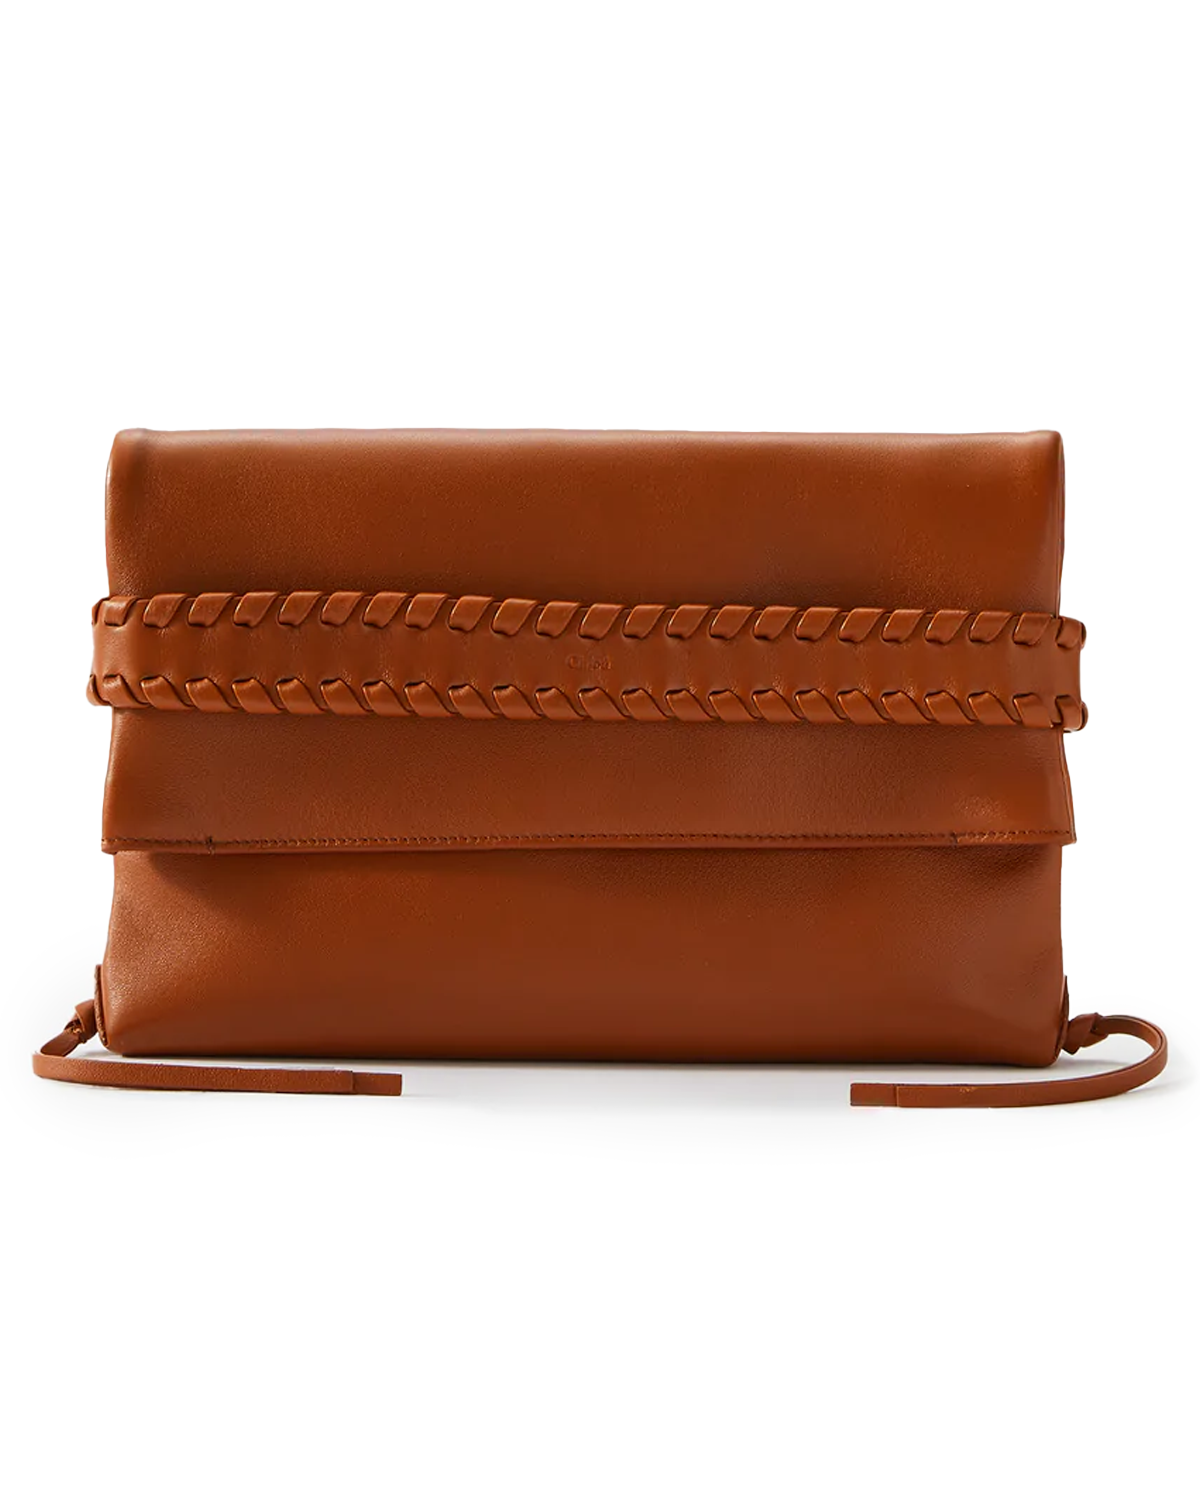 Mony Fold Over Clutch in Caramel